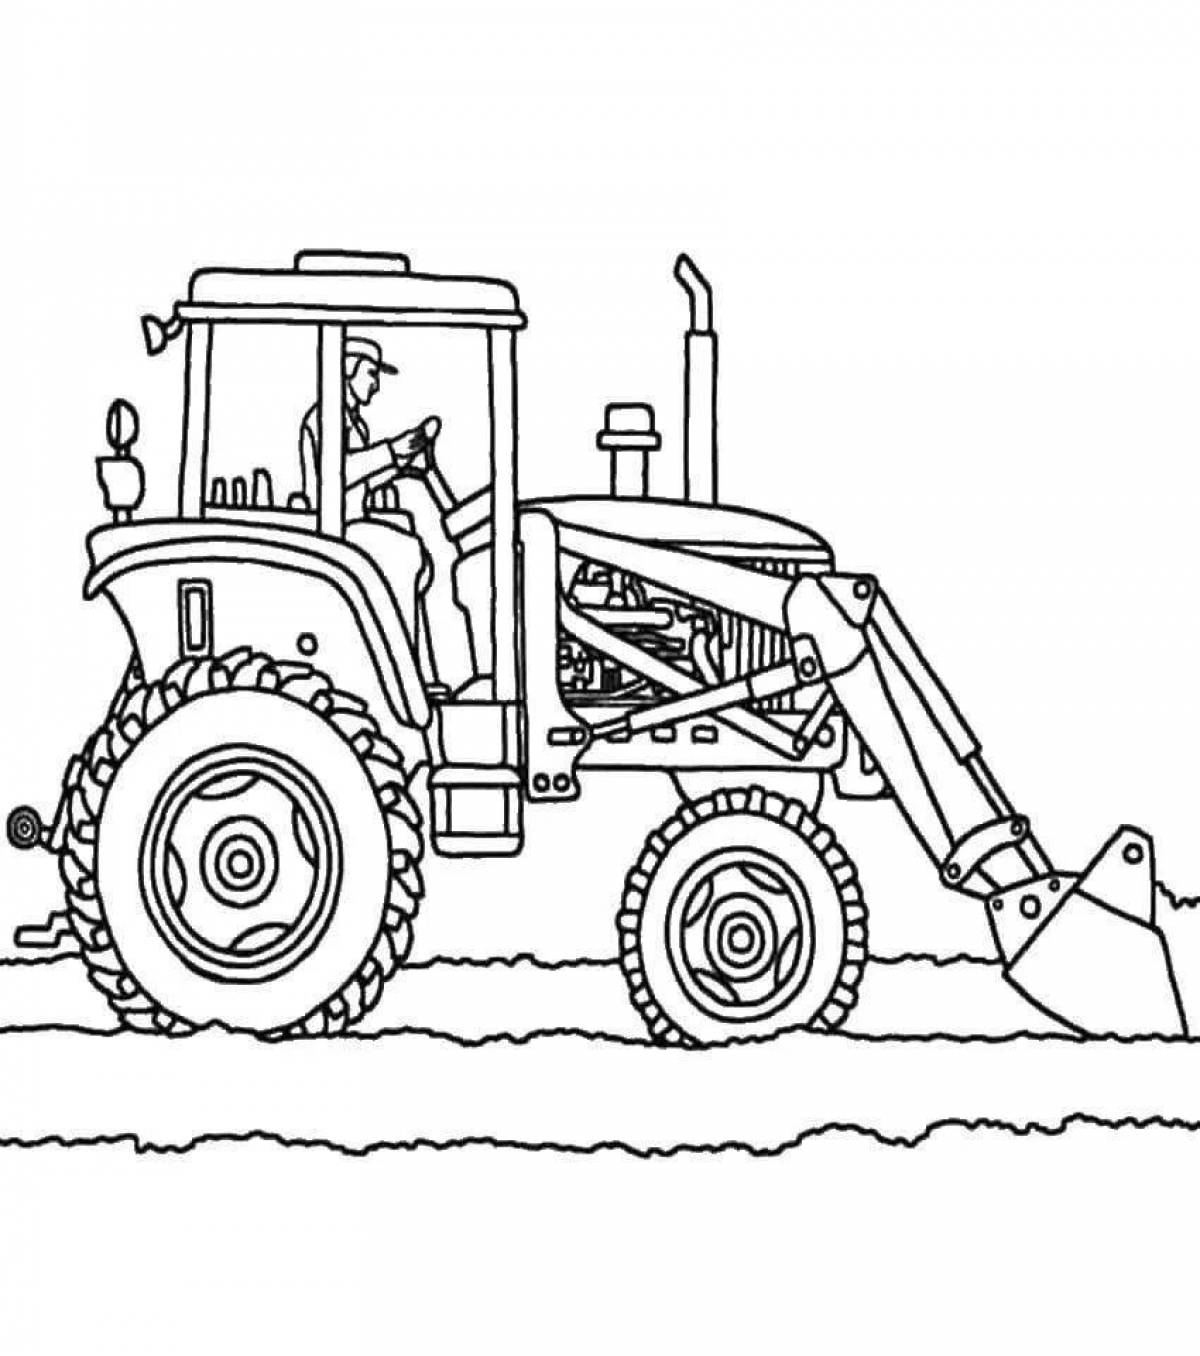 Colorful tractor with cart coloring book